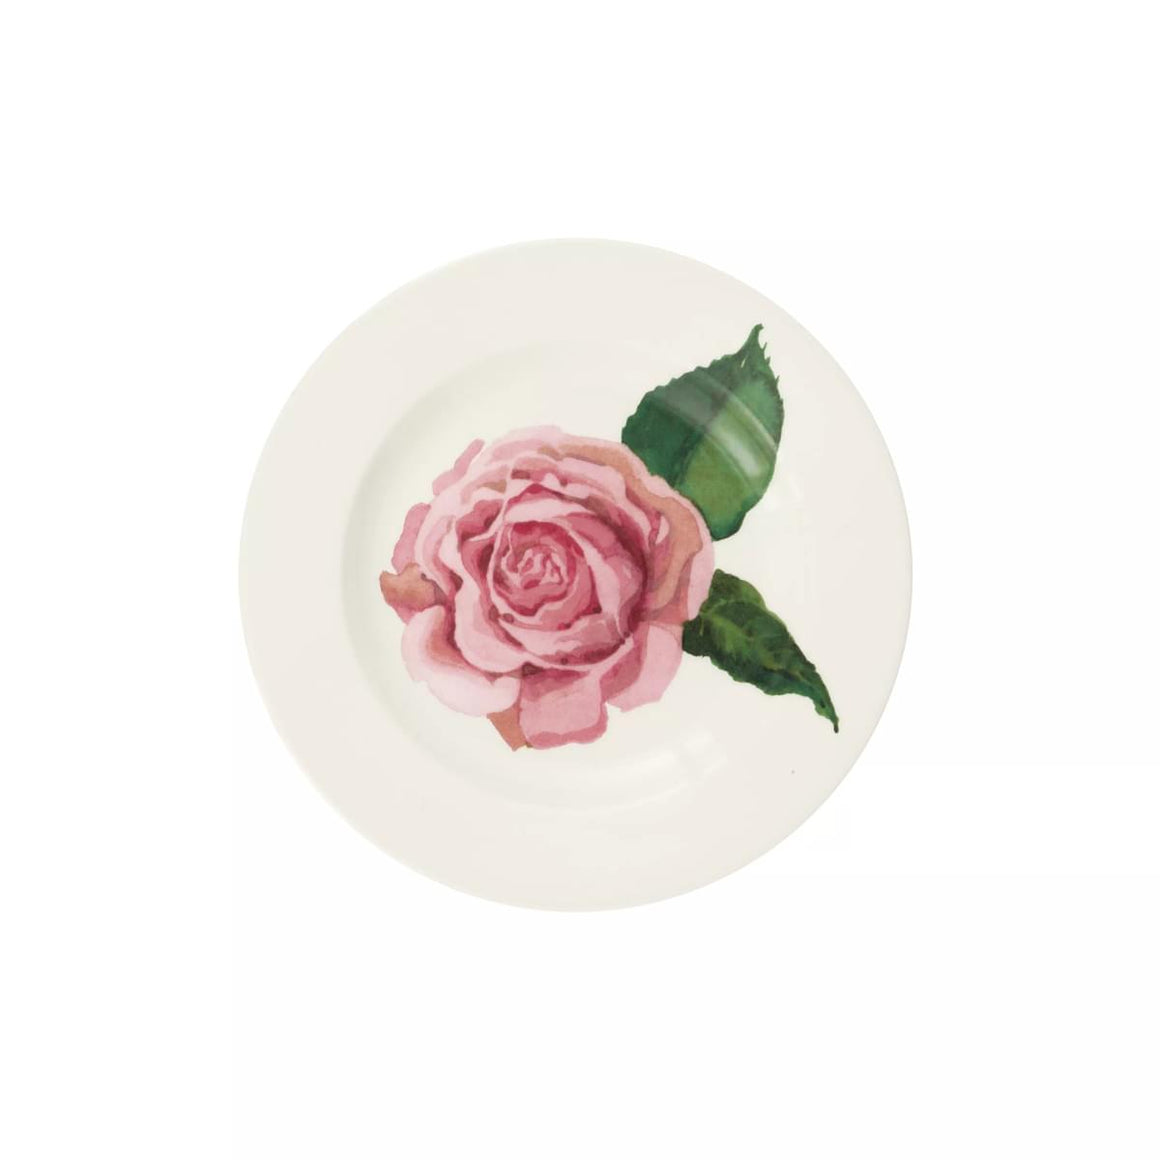 Emma Bridgewater Roses All My Life 6.5" Side Plate